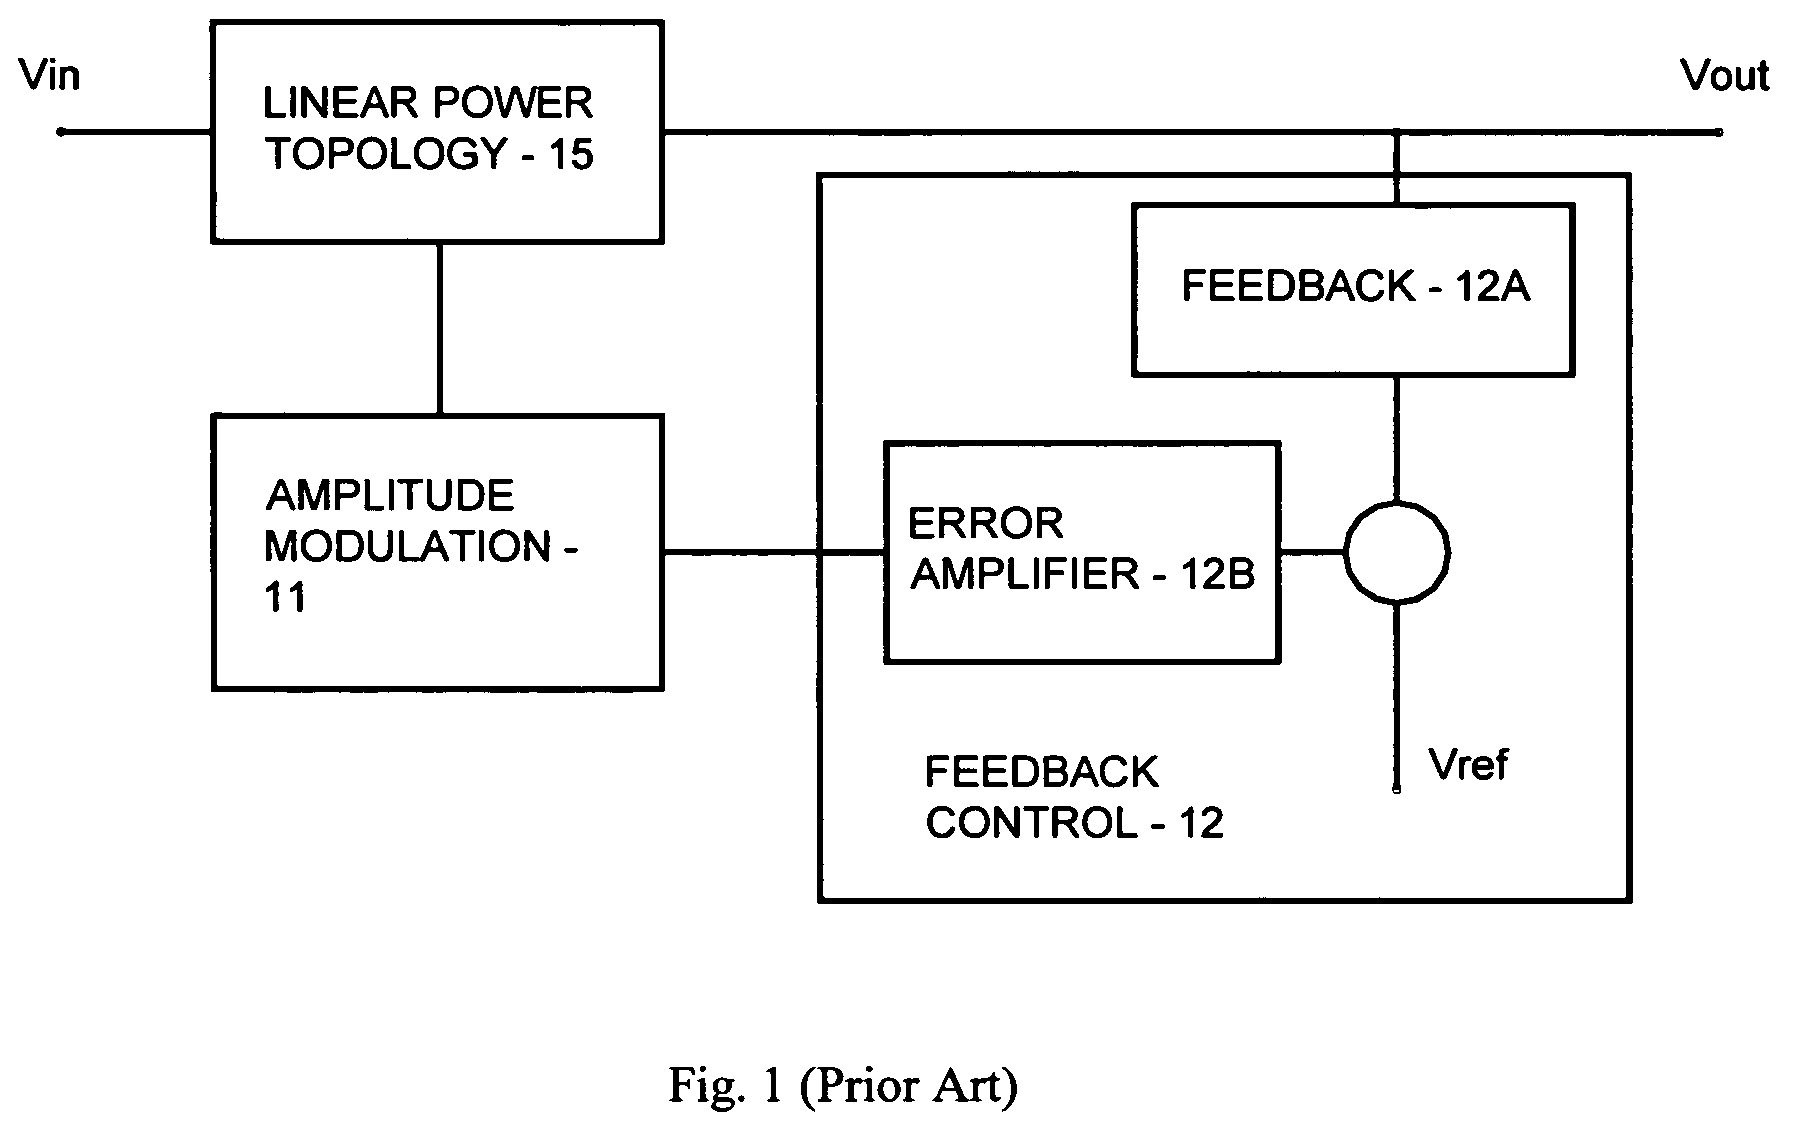 Adaptive DC to DC converter system using a combination of duty cycle and slew rate modulations